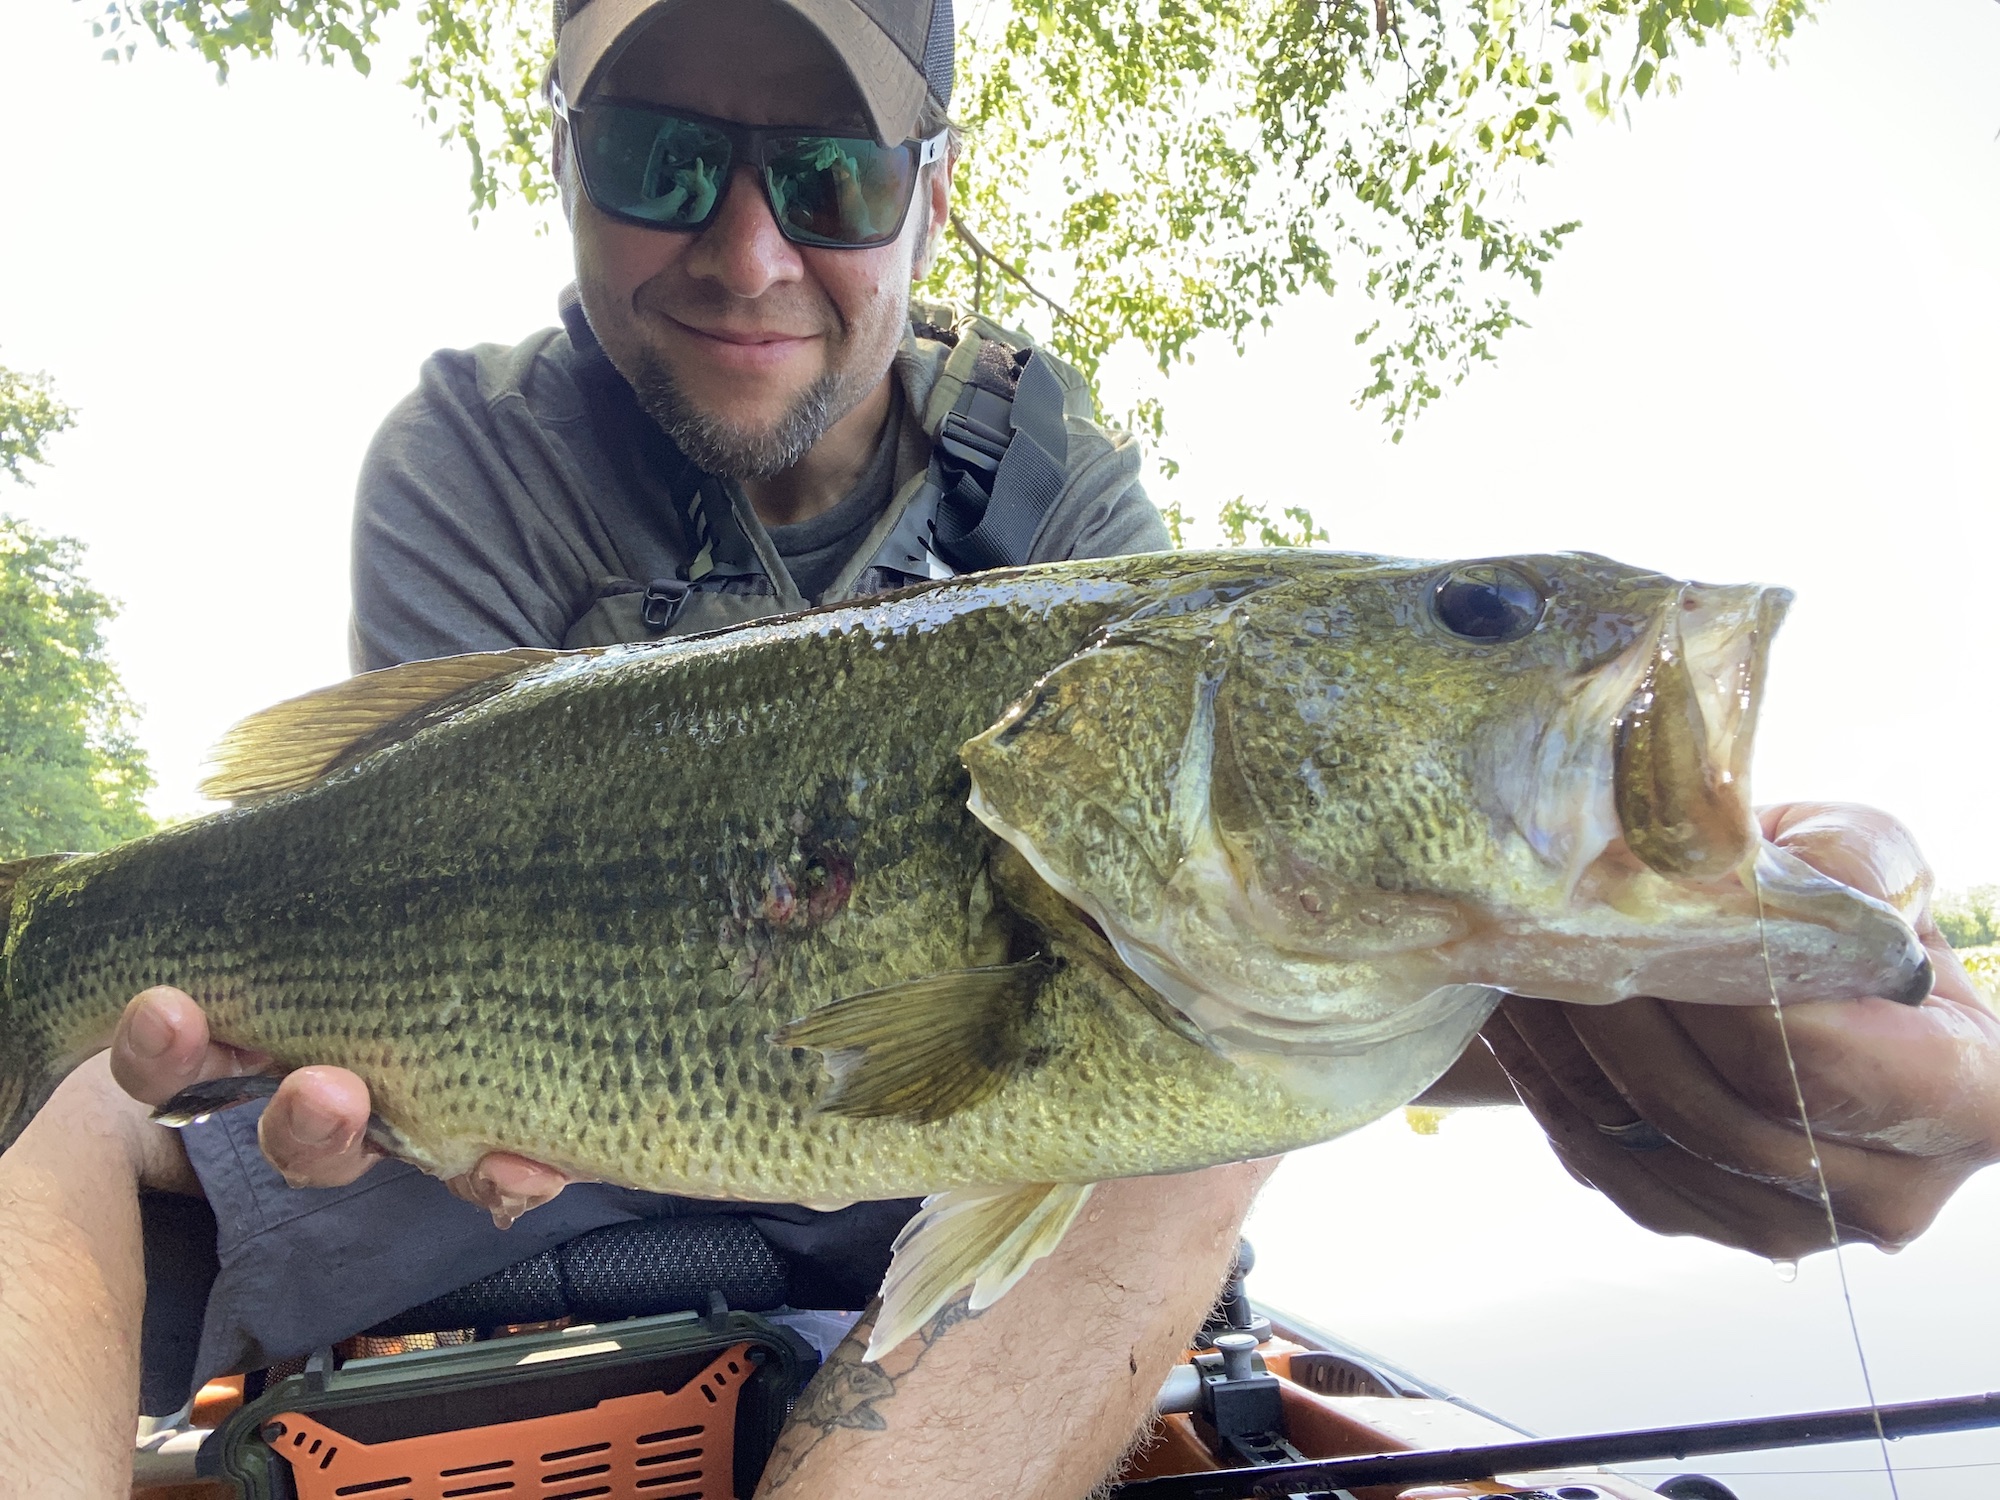 Best Bass Fishing Gear Hack: Get More Without Paying More - Men's